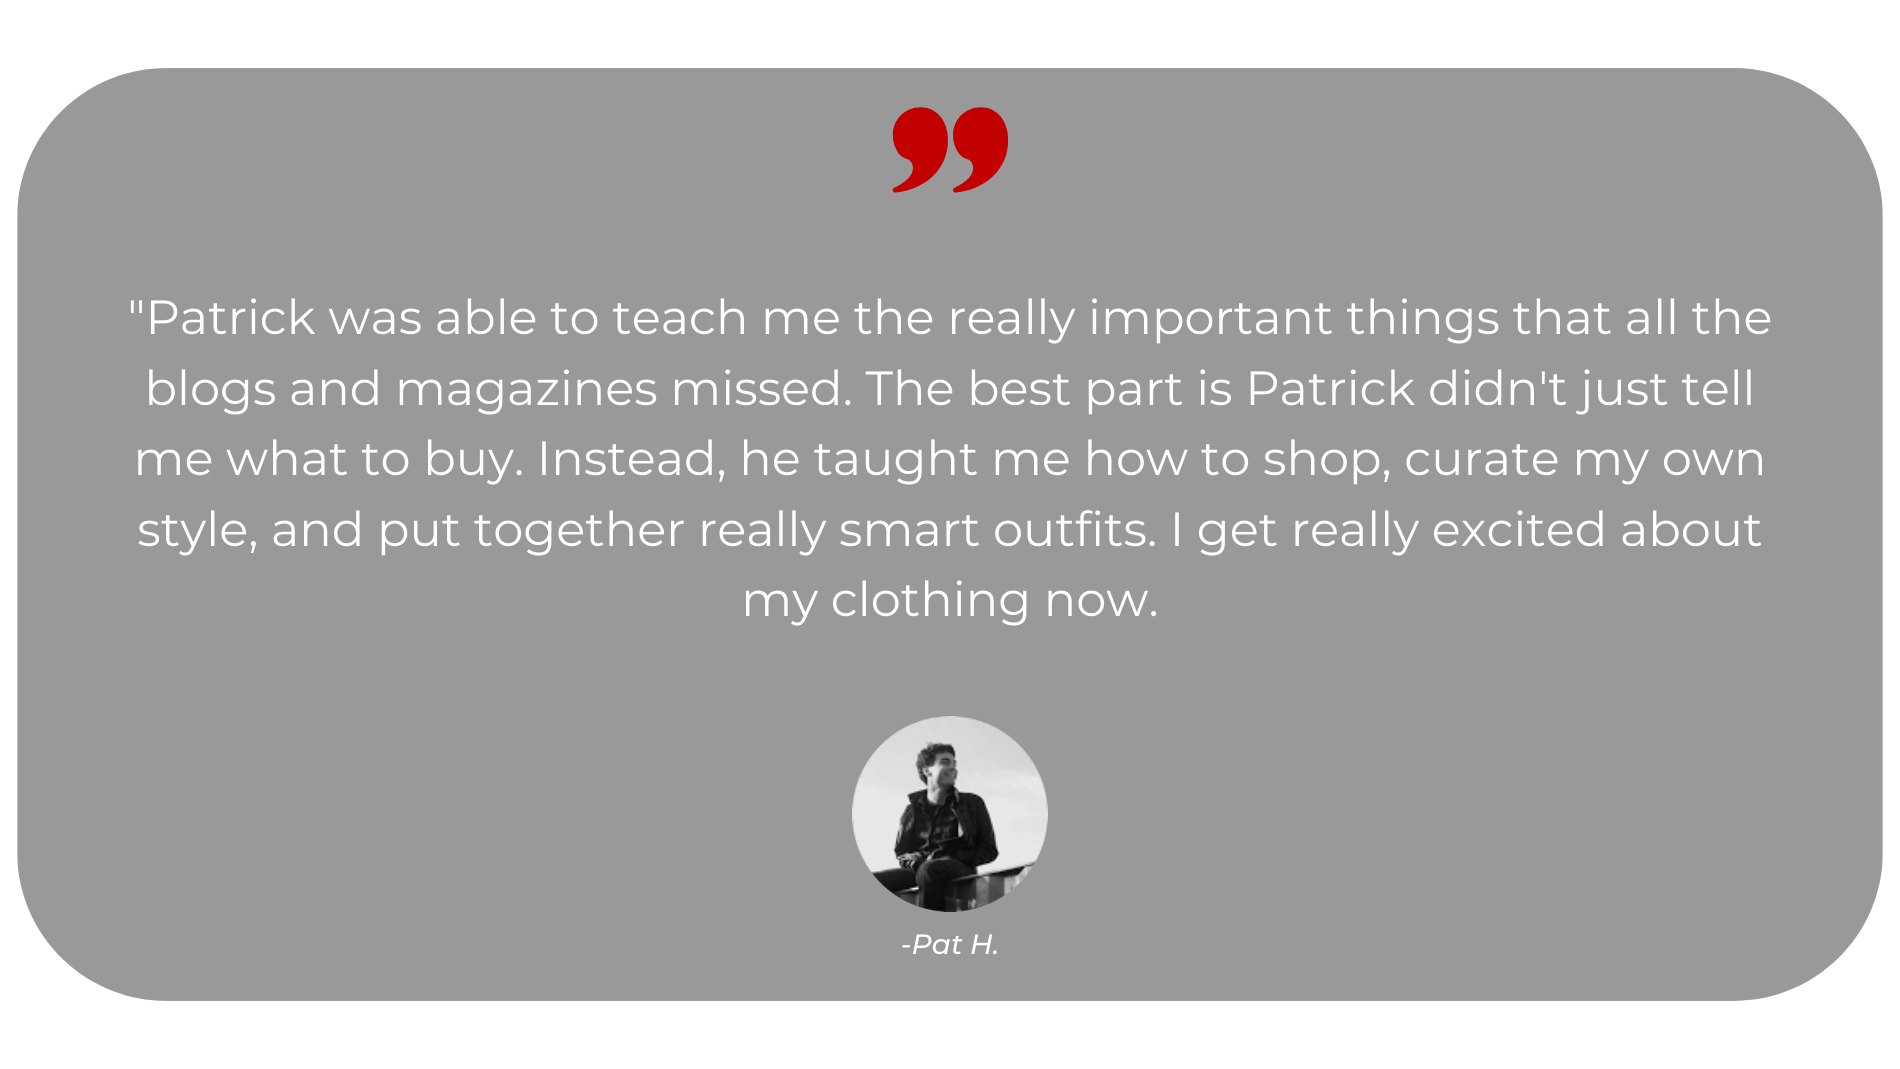 personal-stylist-Pivot-Image-consulting-review (36)-min.png